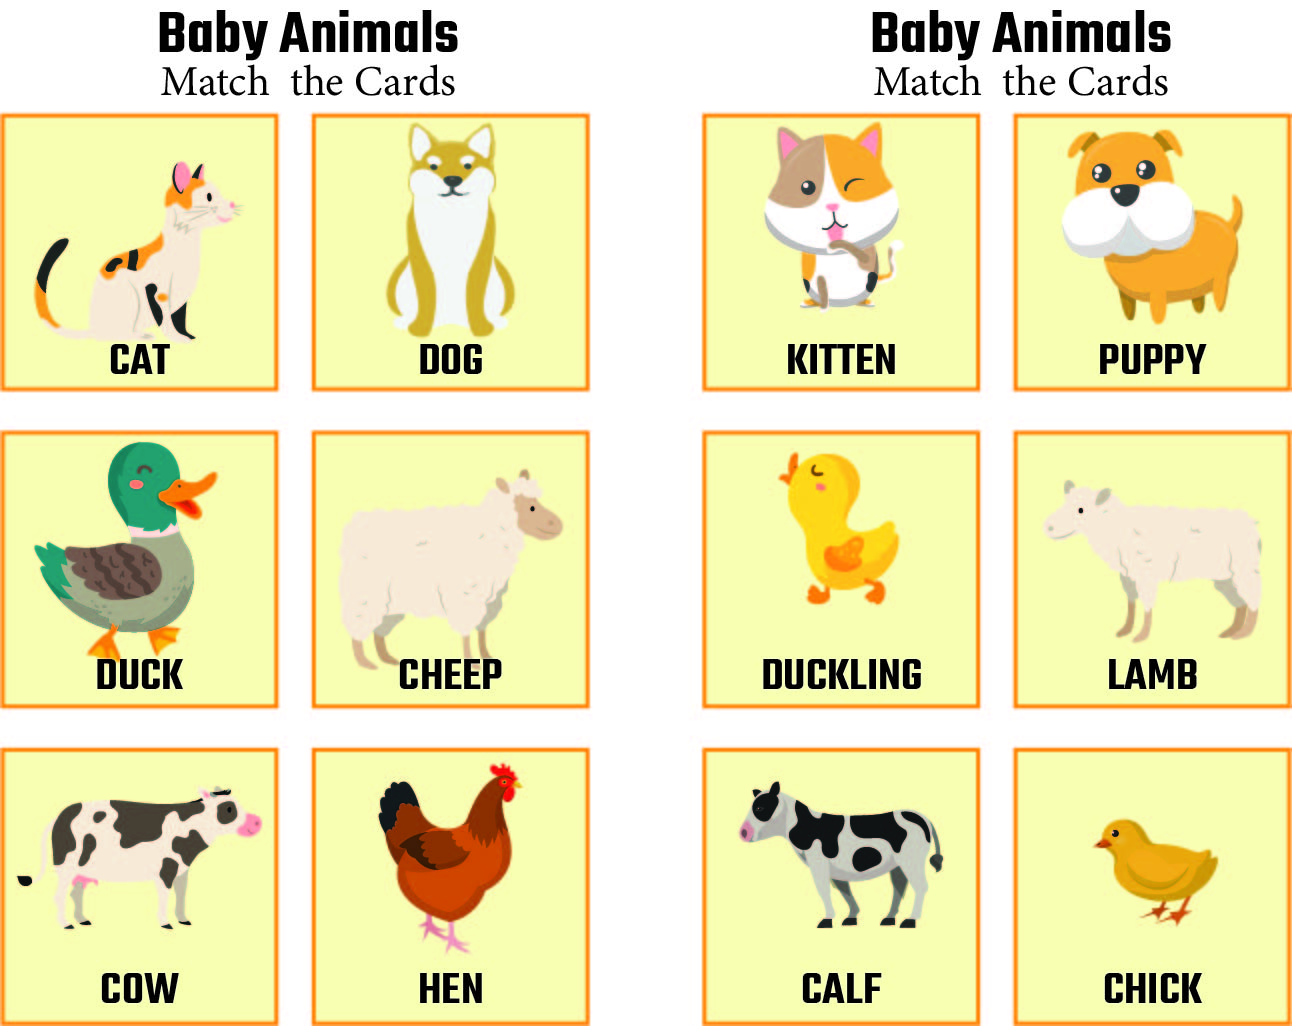 Baby animals and their parents | English - Quizizz